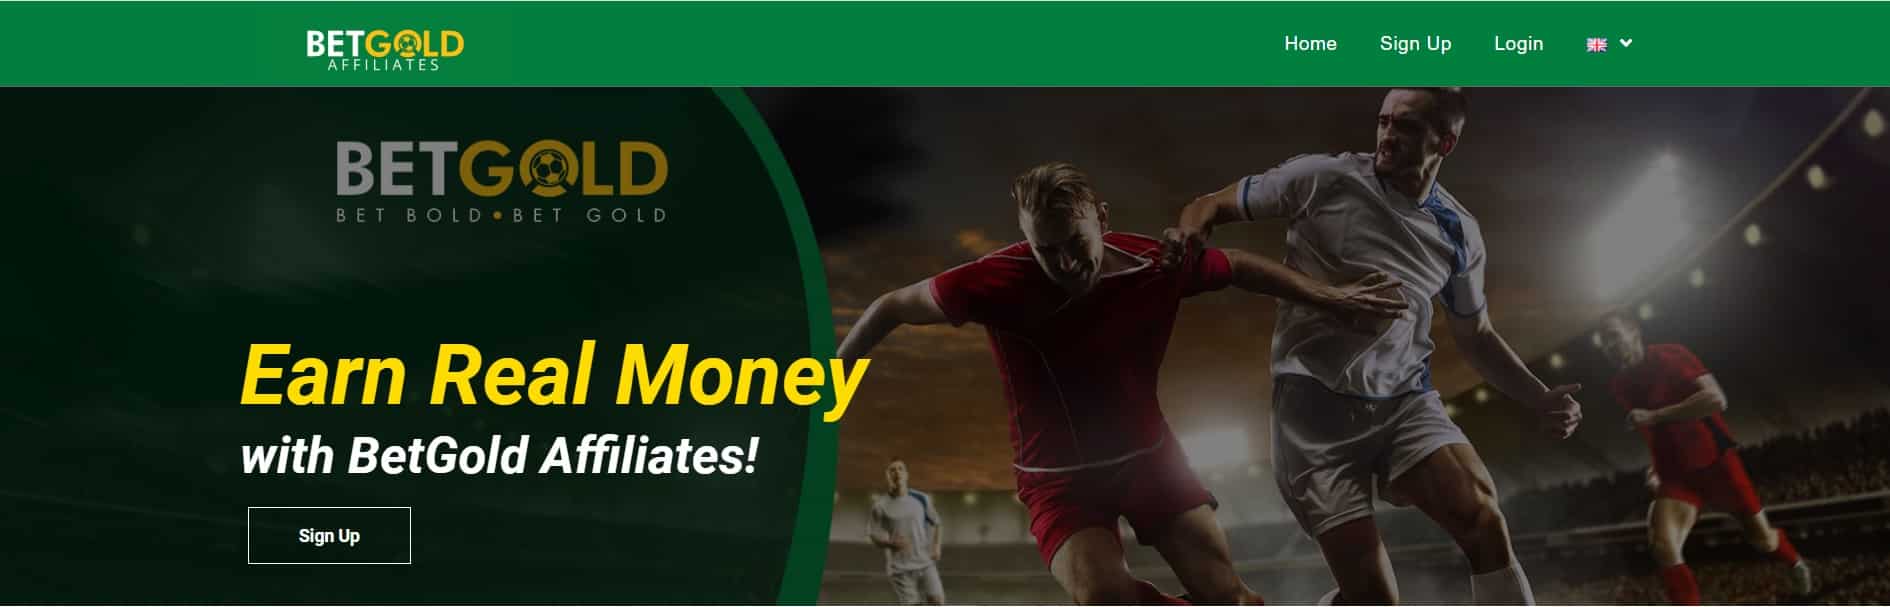 Earn Real Money with BetGold Affiliates - AffPapa